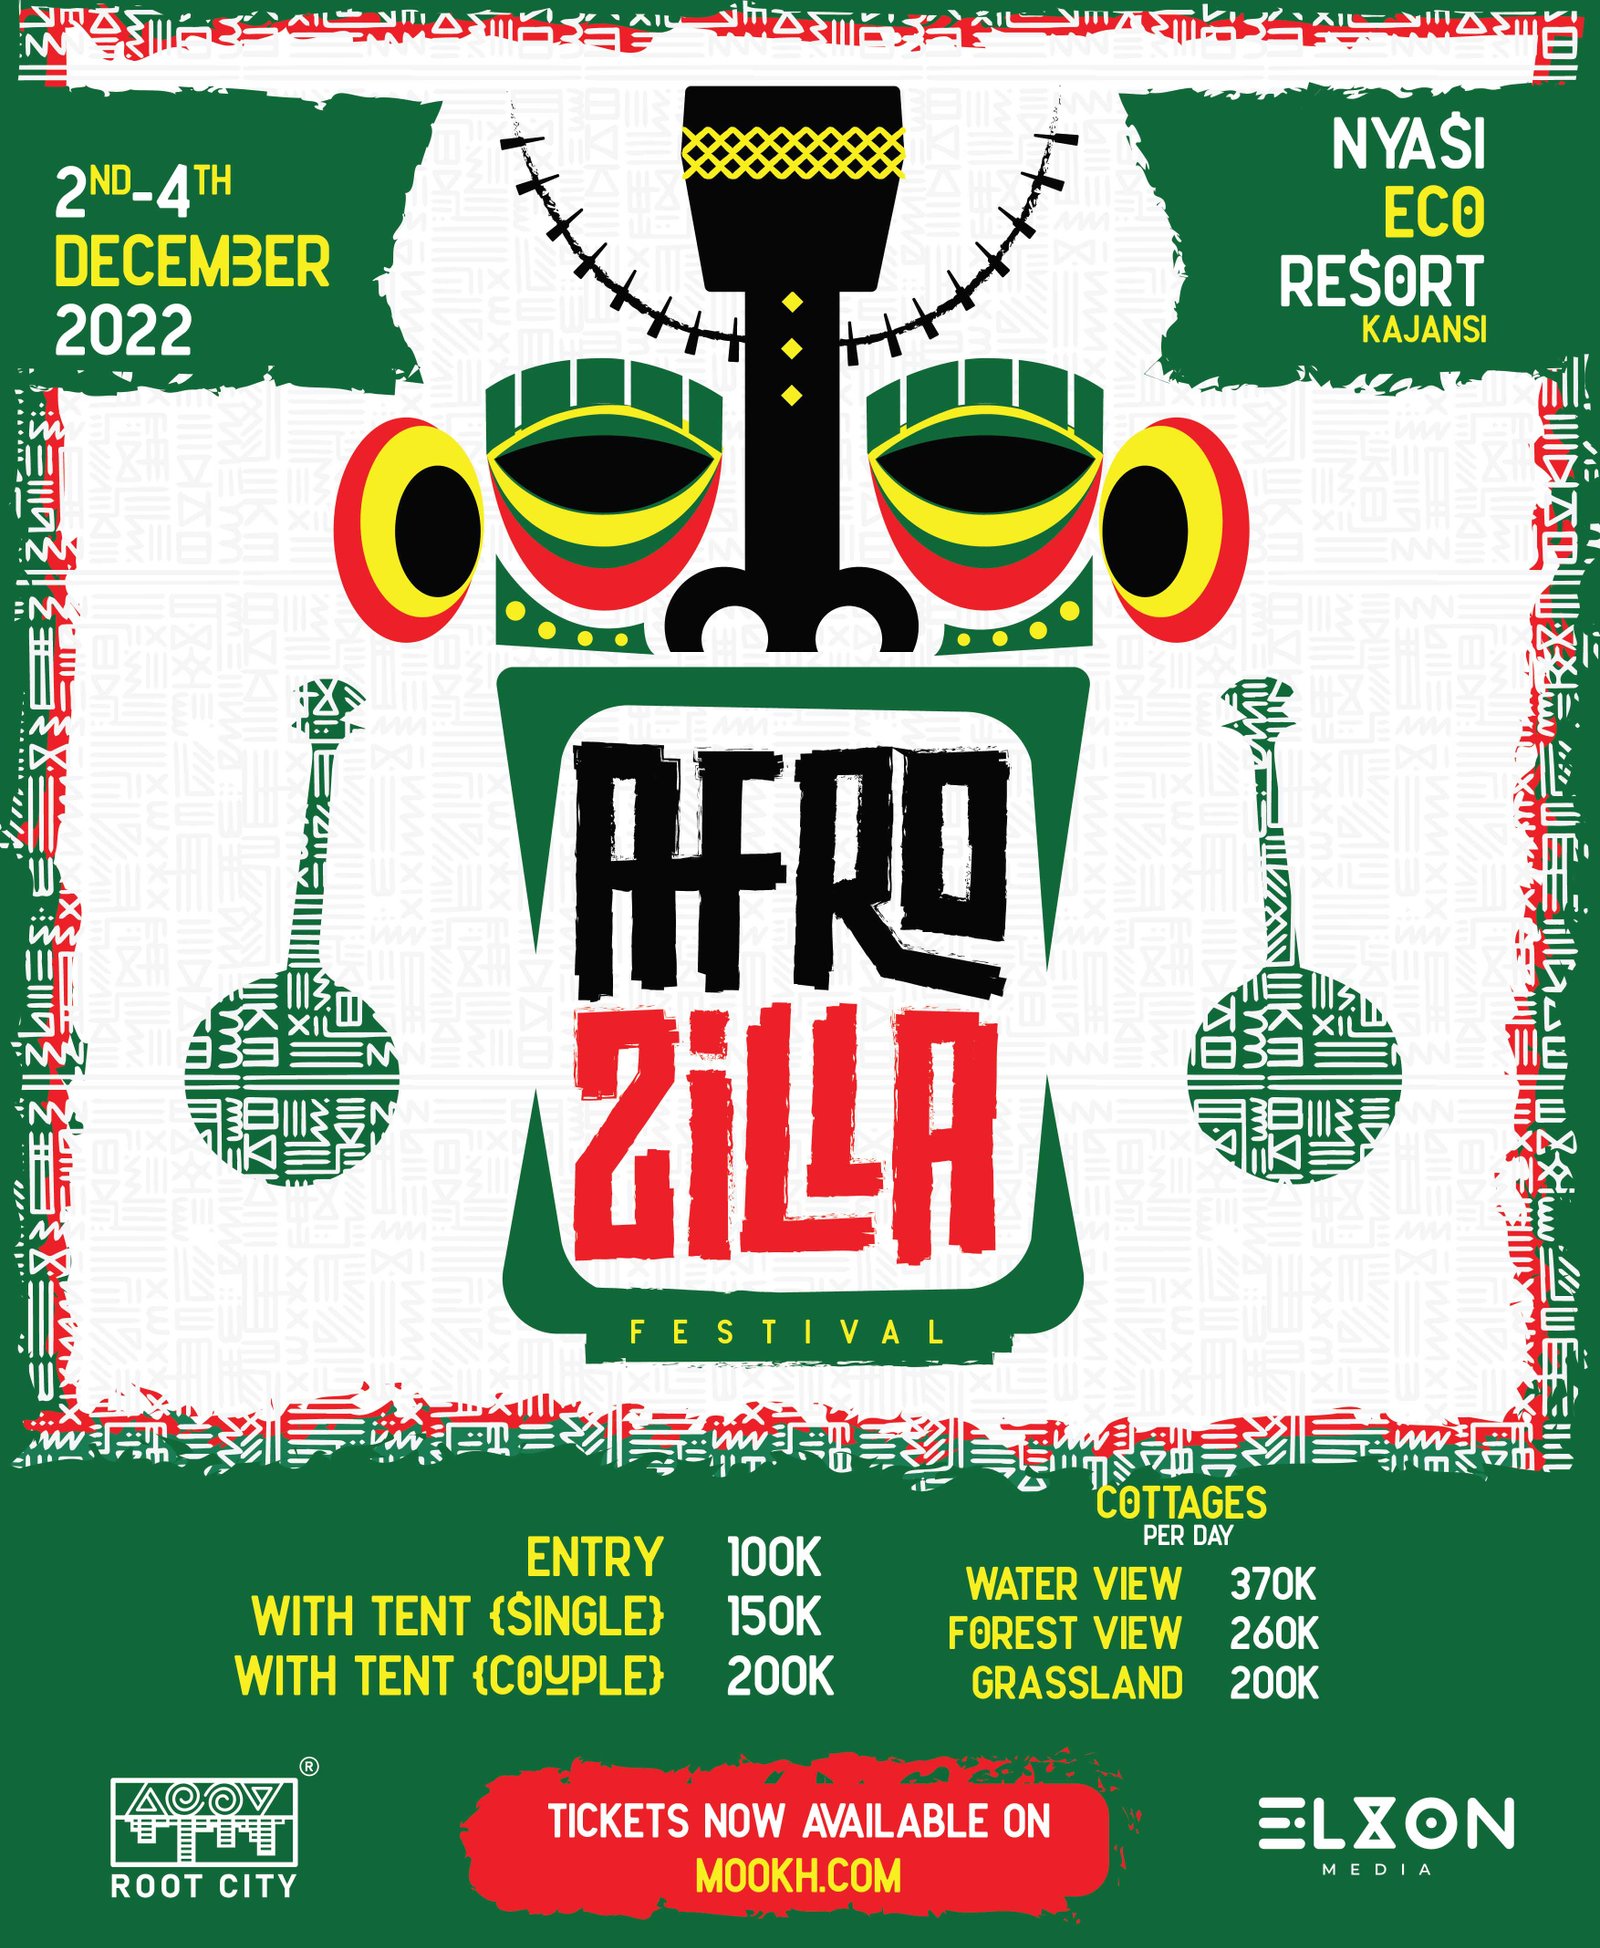 Root City Records and Elxon media are set for the 1st Edition of Afro Zilla Festival Nyasi Eco Resort in Kajjansi